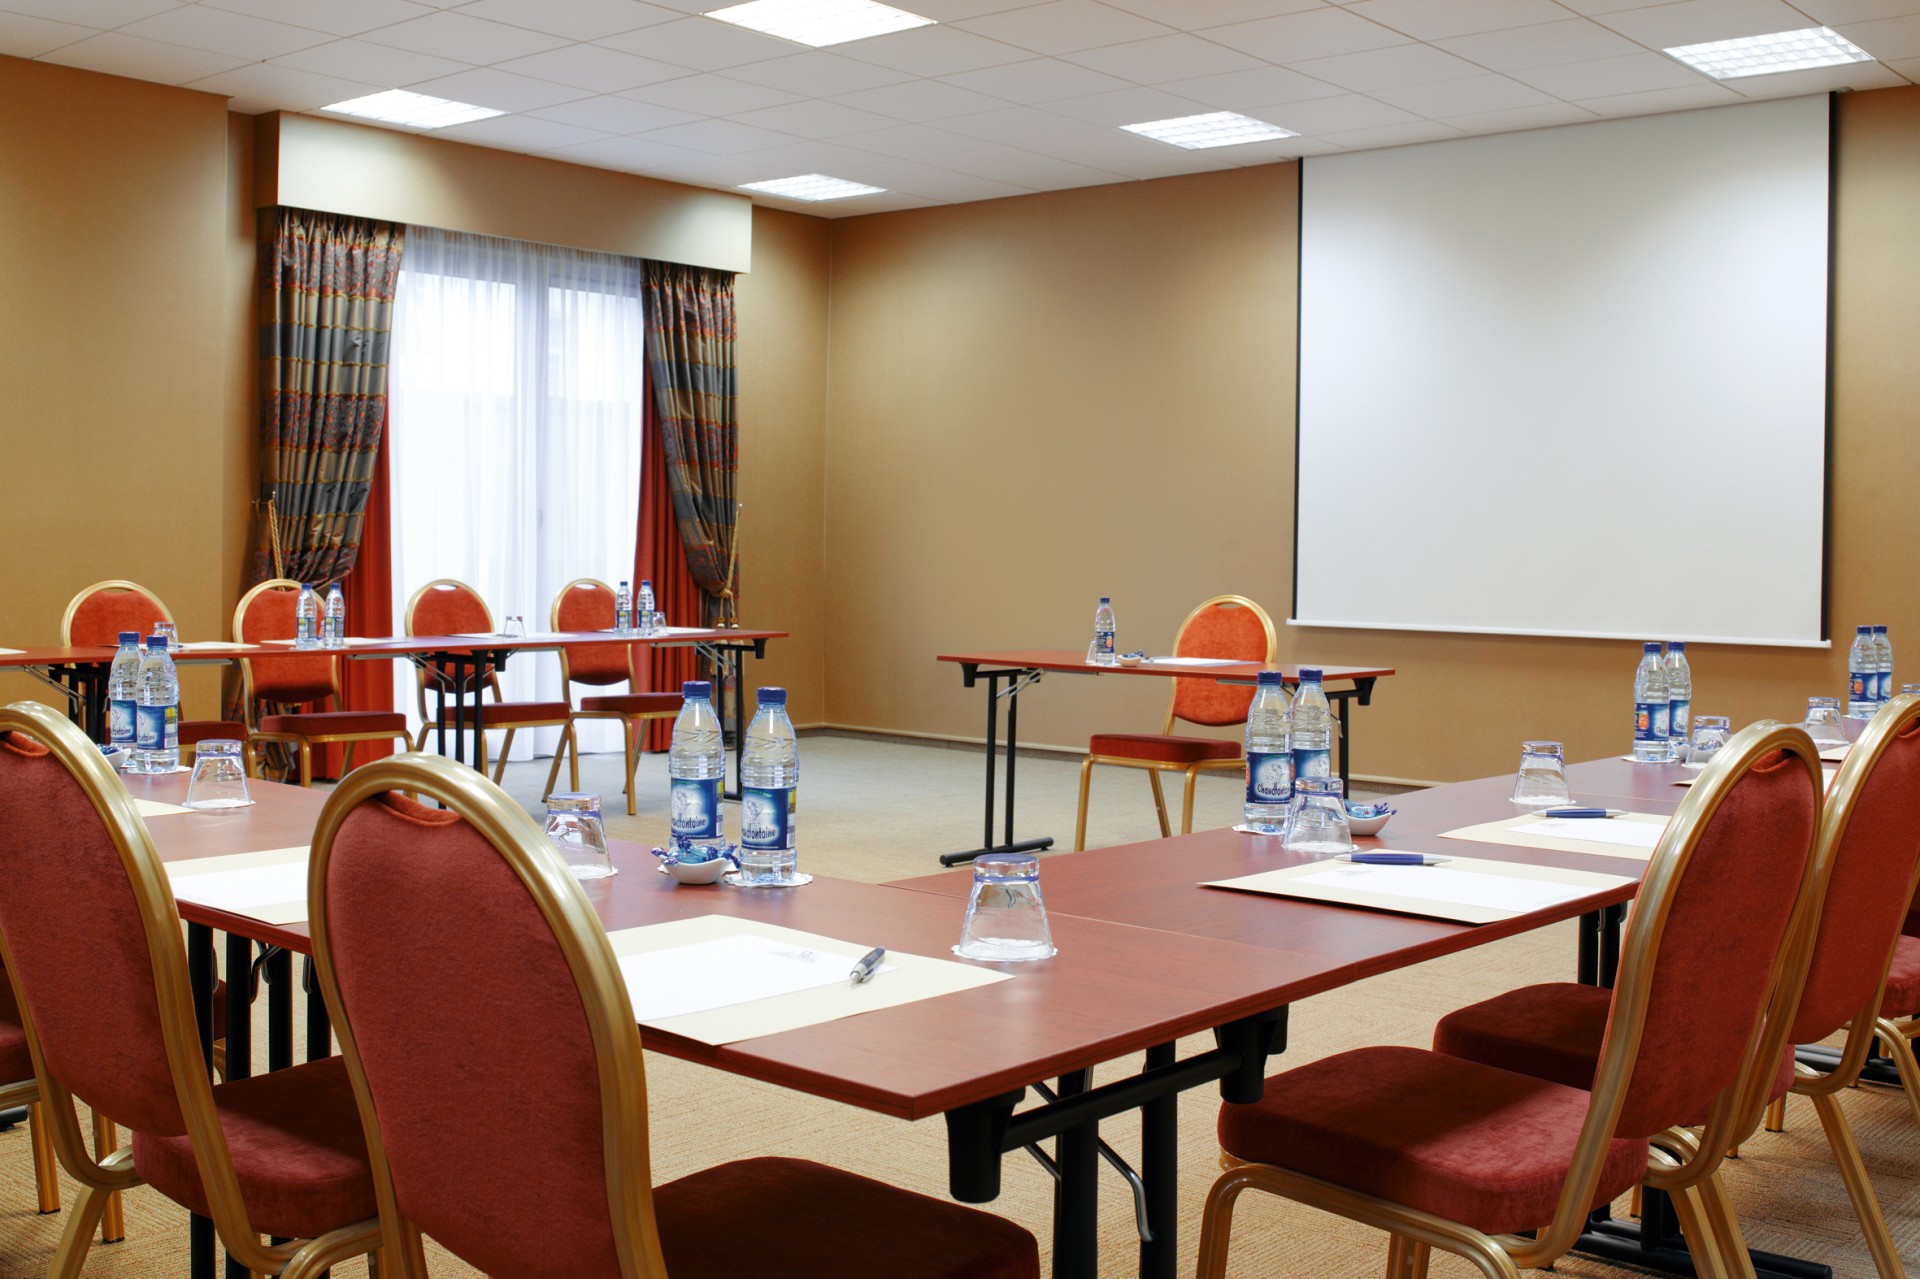 Château des Thermes in Chaudfontaine - Seminar rooms